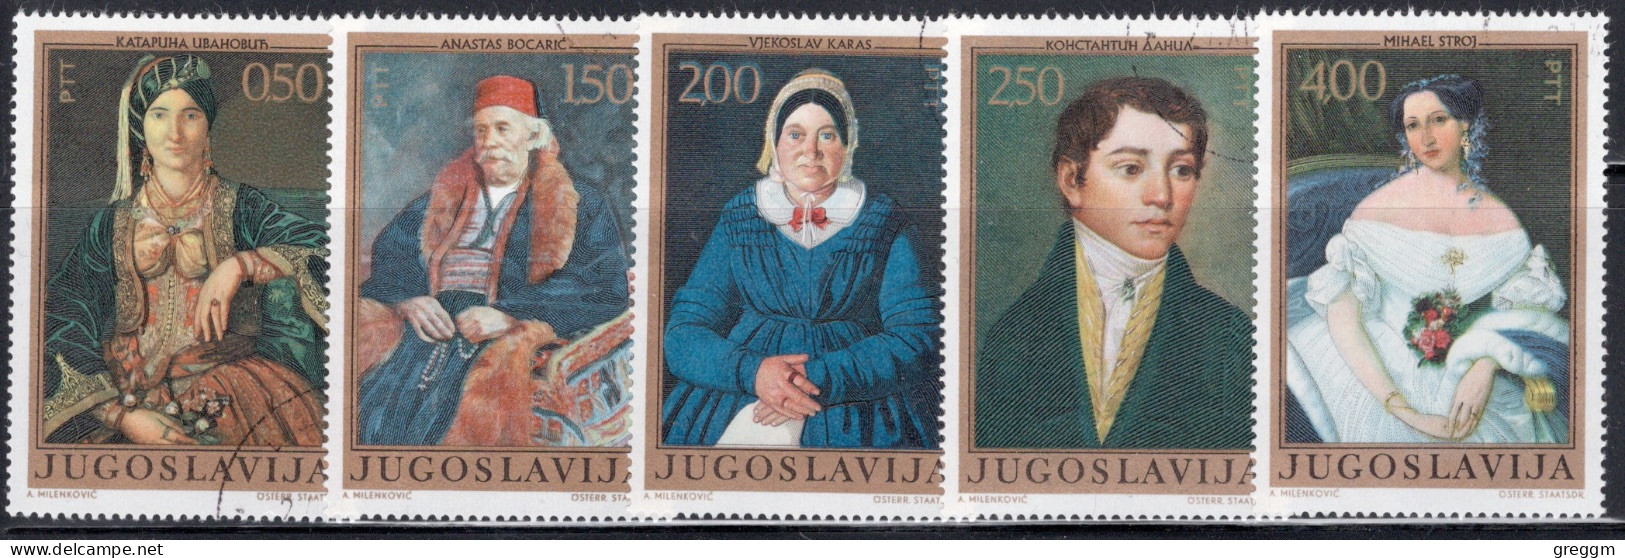 Yugoslavia 1971 Short Set Of Stamps For Portraits From The 19th Century  In Fine Used - Gebraucht